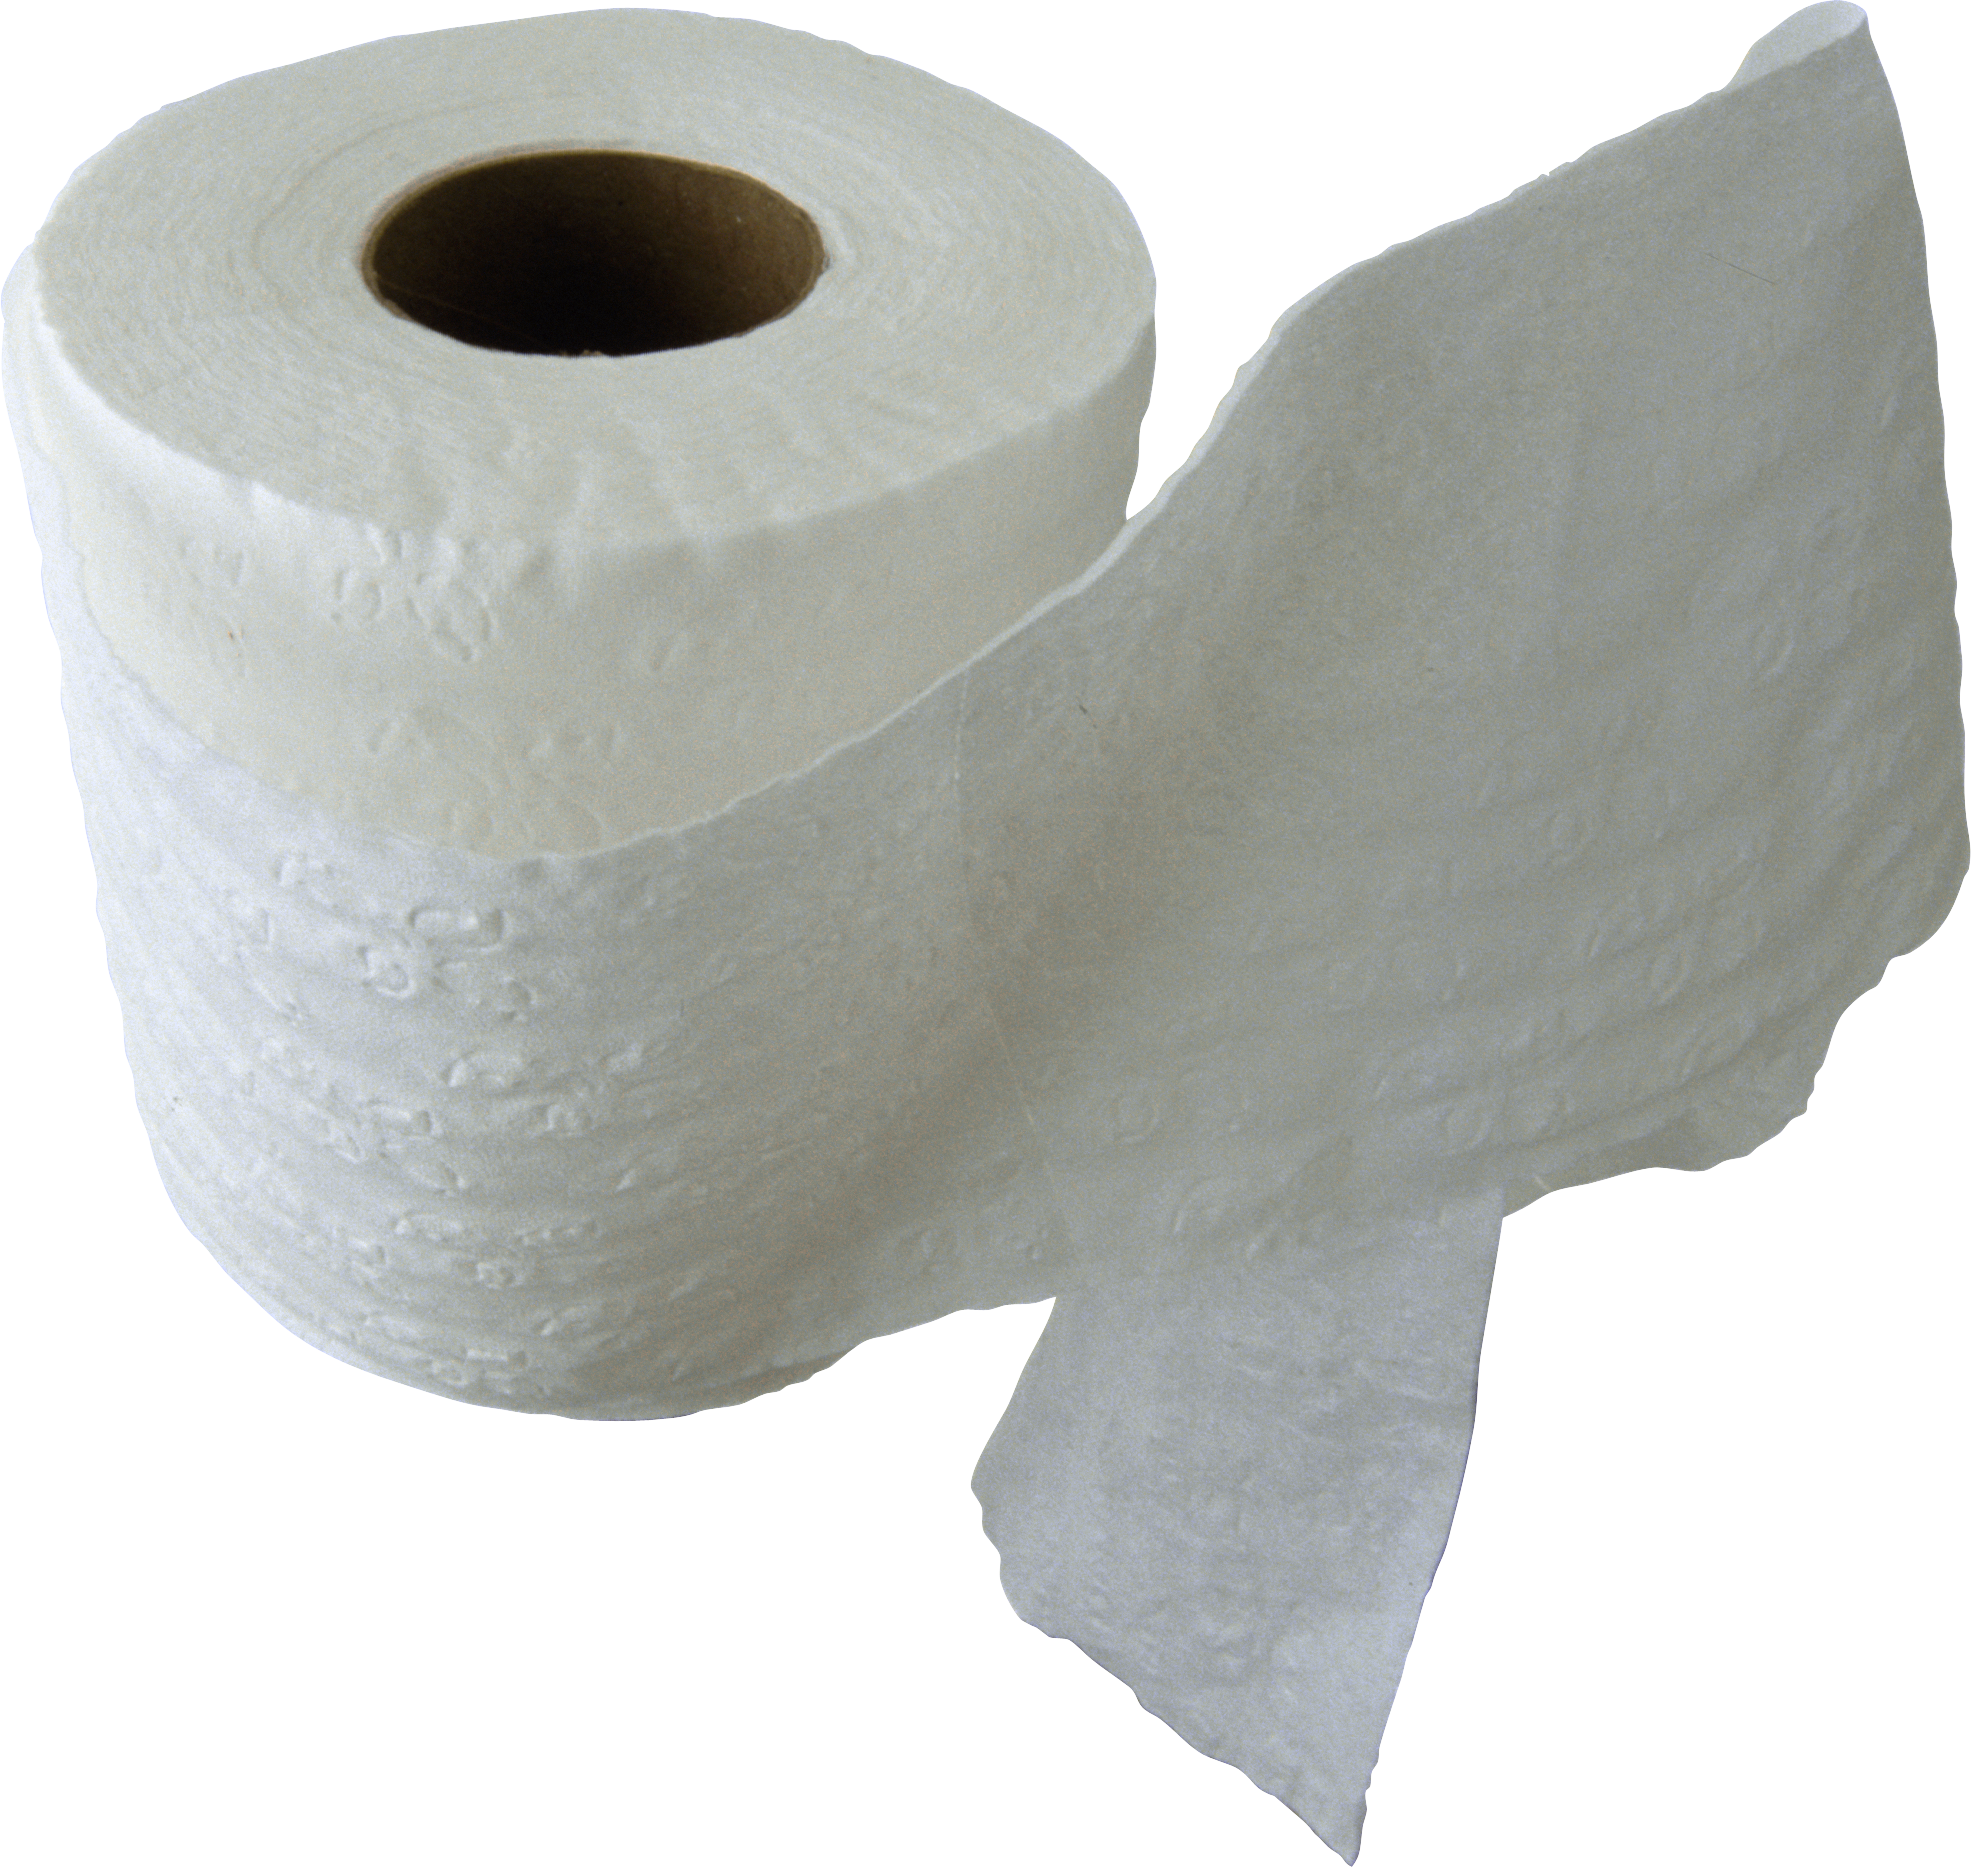 Toilet Roll PNG HD - 139643